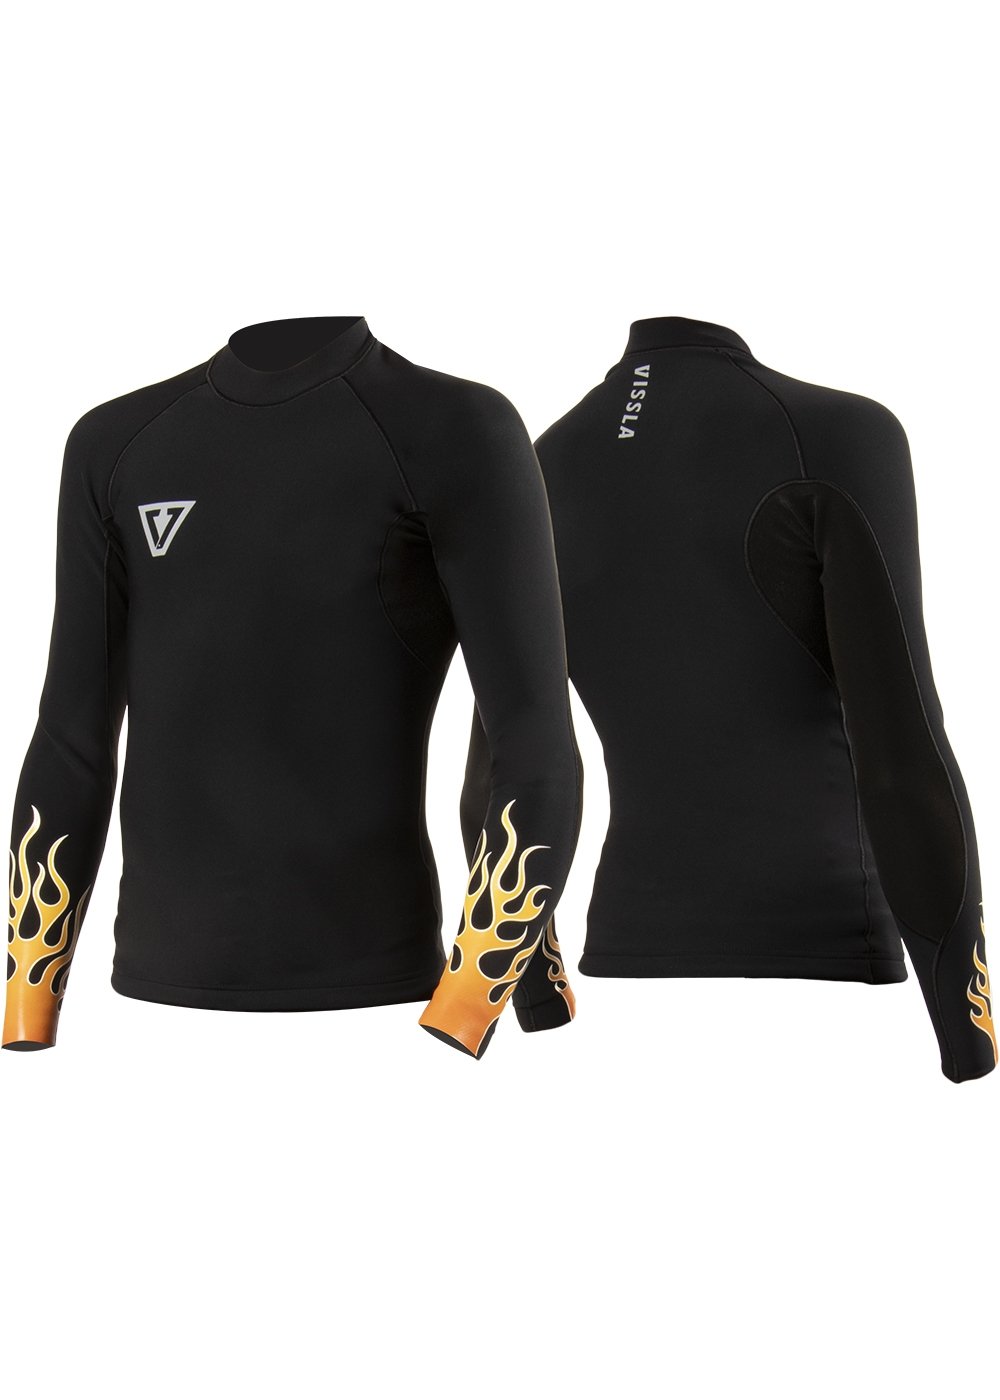 Vissla Boys Black High Fire 1mm Long Sleeve Wetsuit Jacket. Front and Back View.